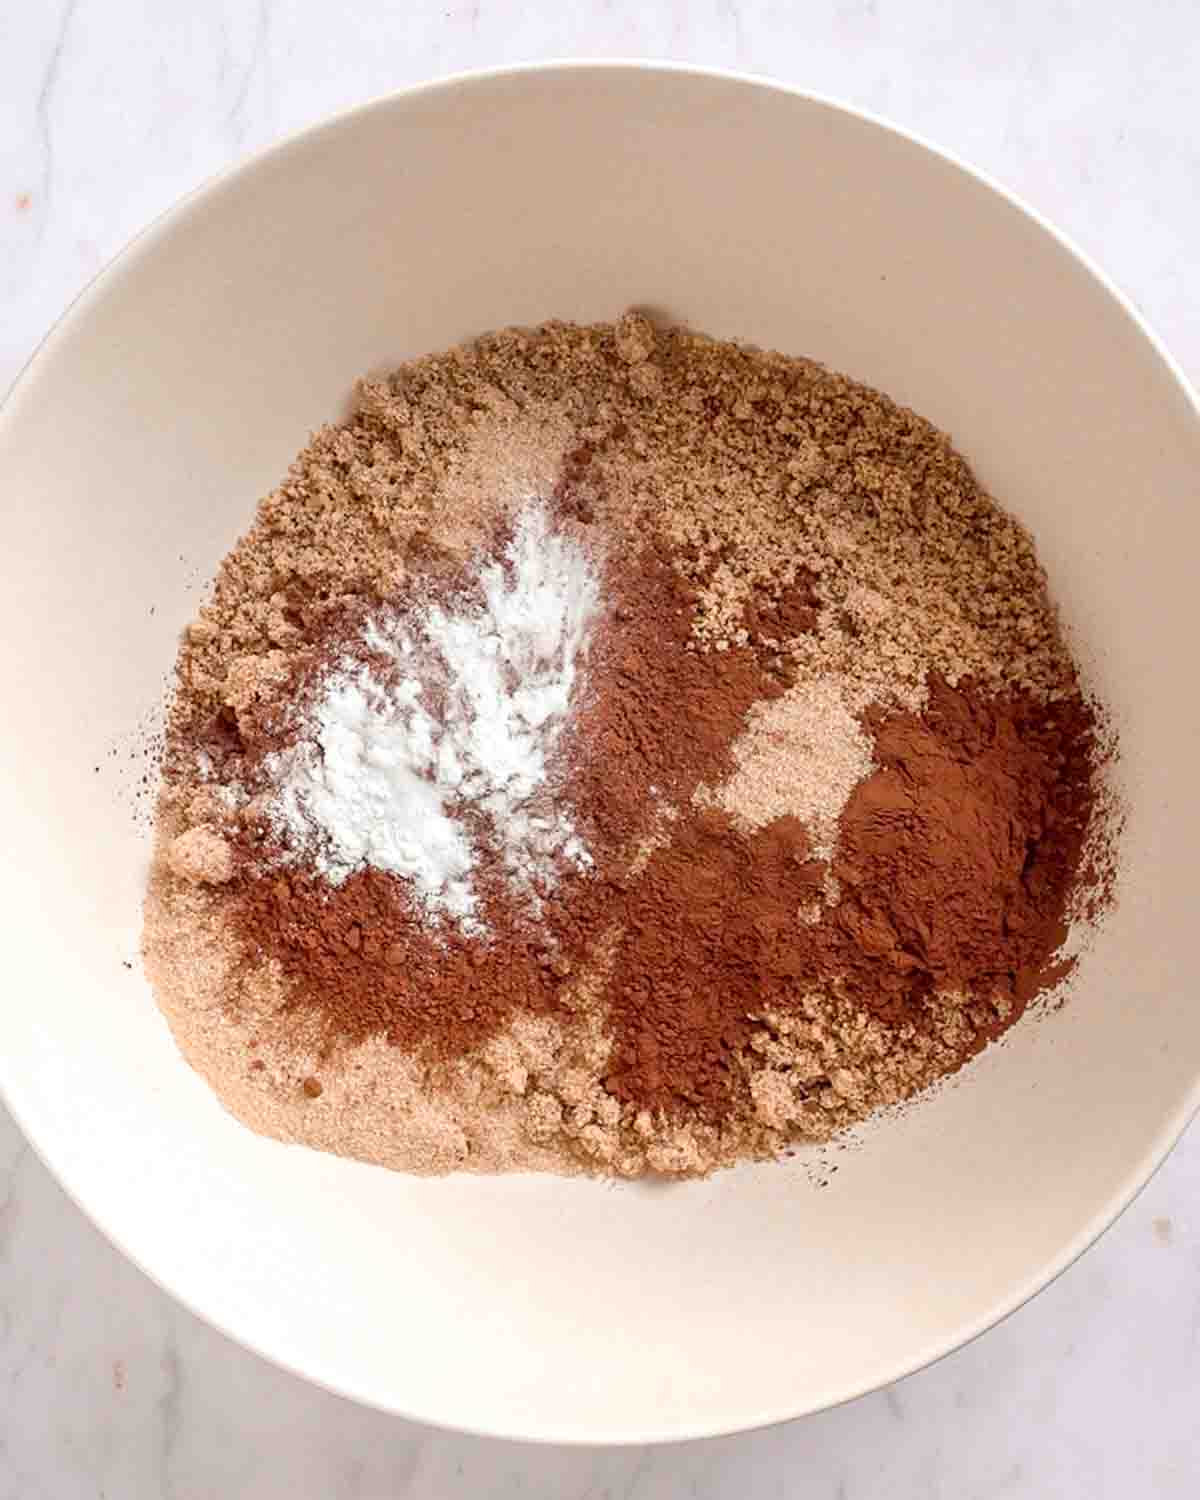 ground roasted hazelnuts, cocoa powder, baking powder and brown sugar added to a large mixing bowl.